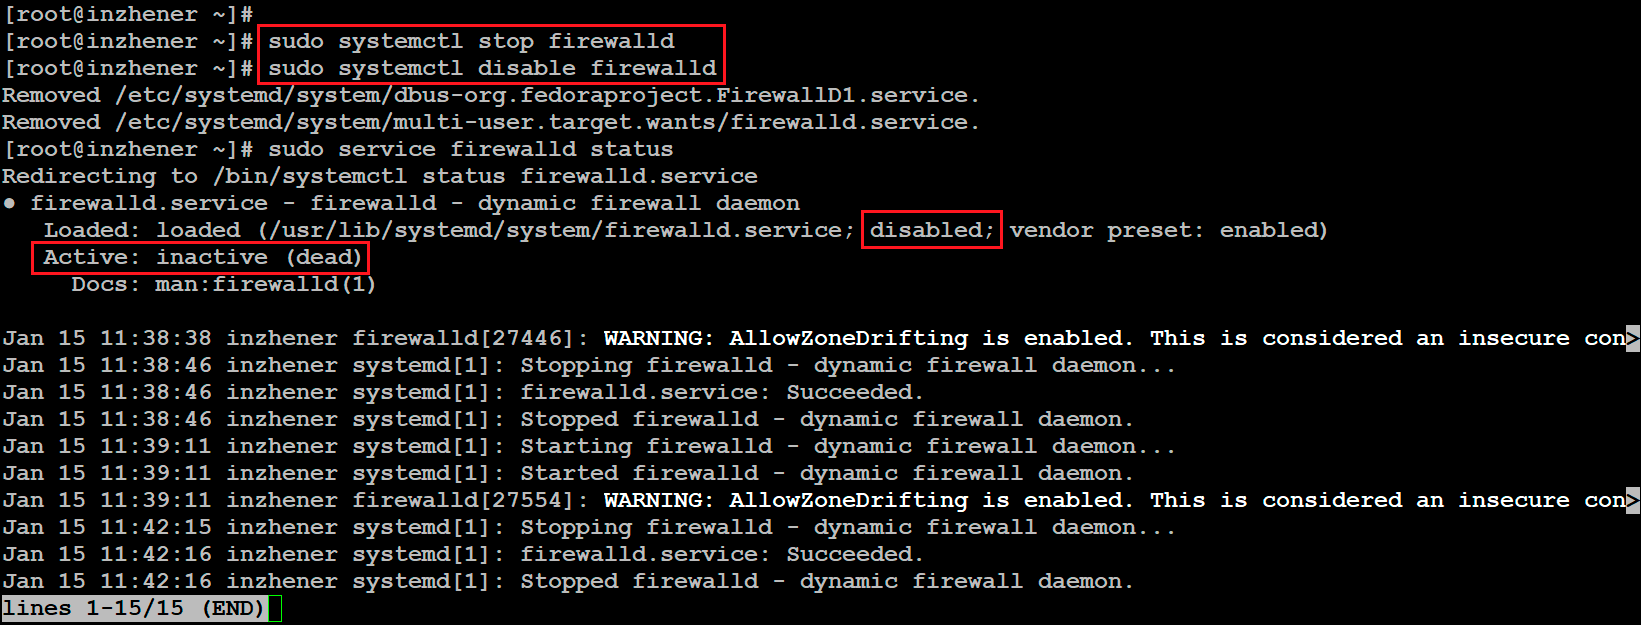 how to temporarily or completely stop the Firewall service on the server